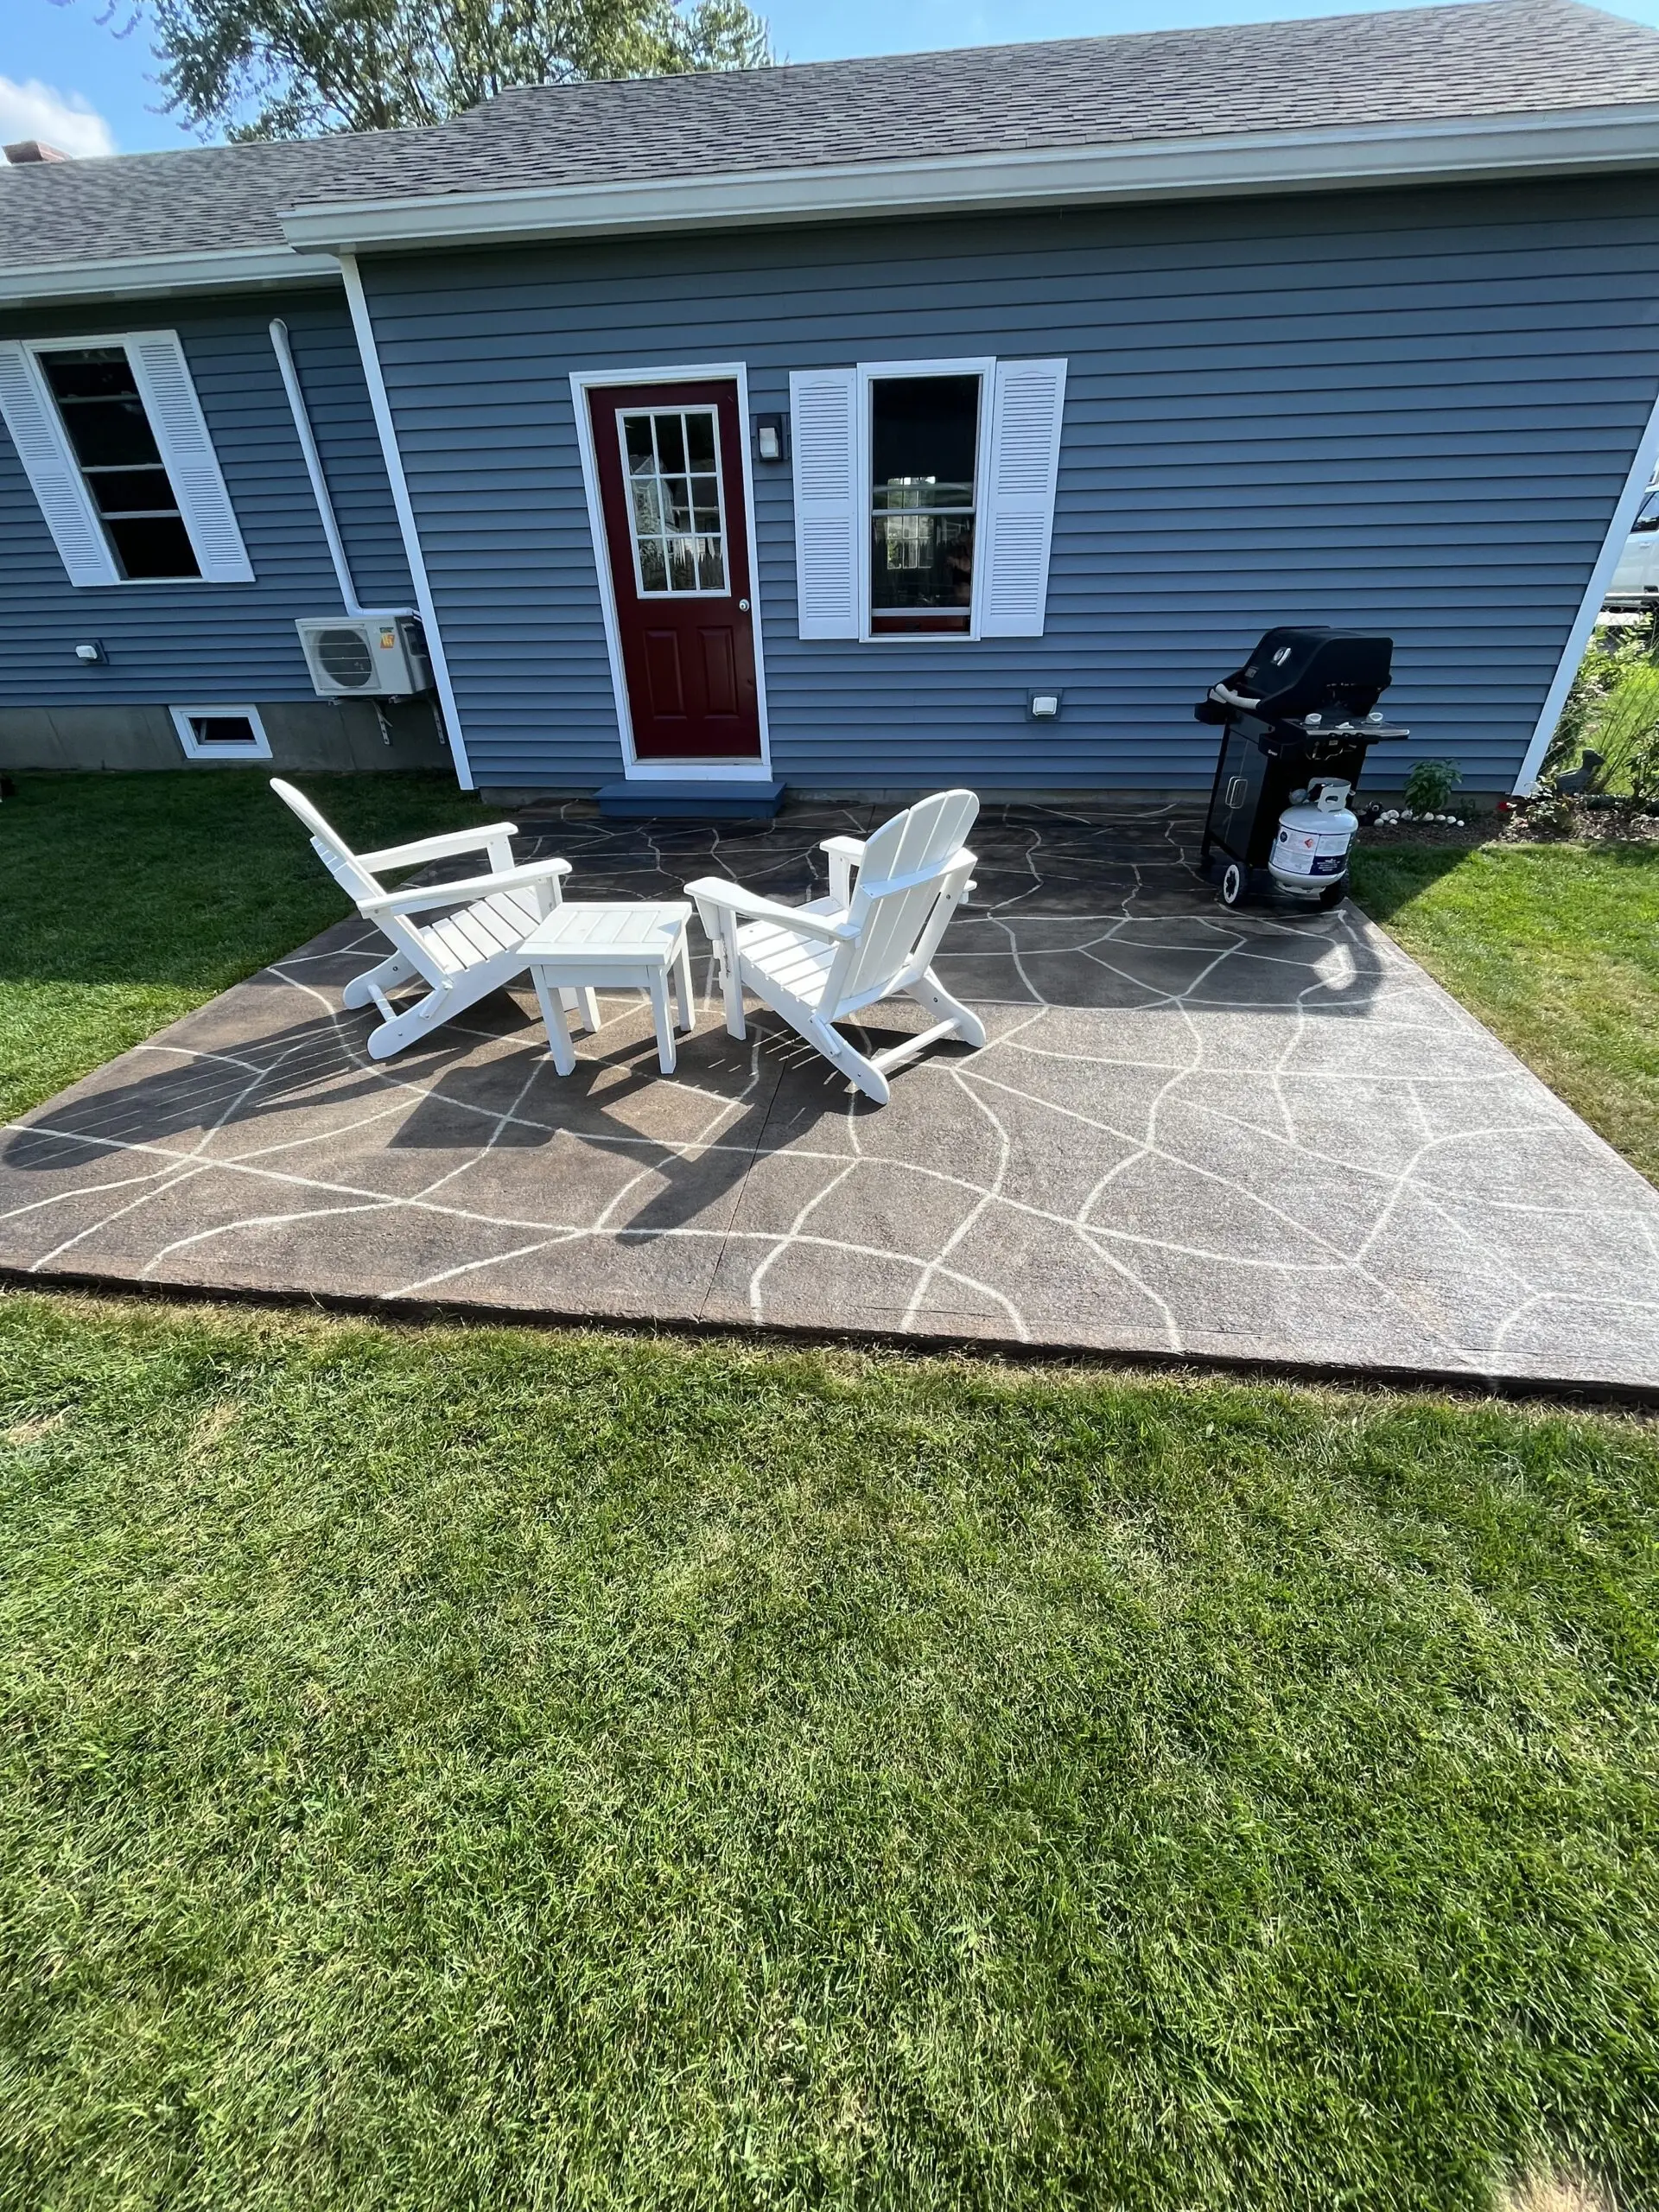 Patio with an acid stained faux flagstone taped stencil design